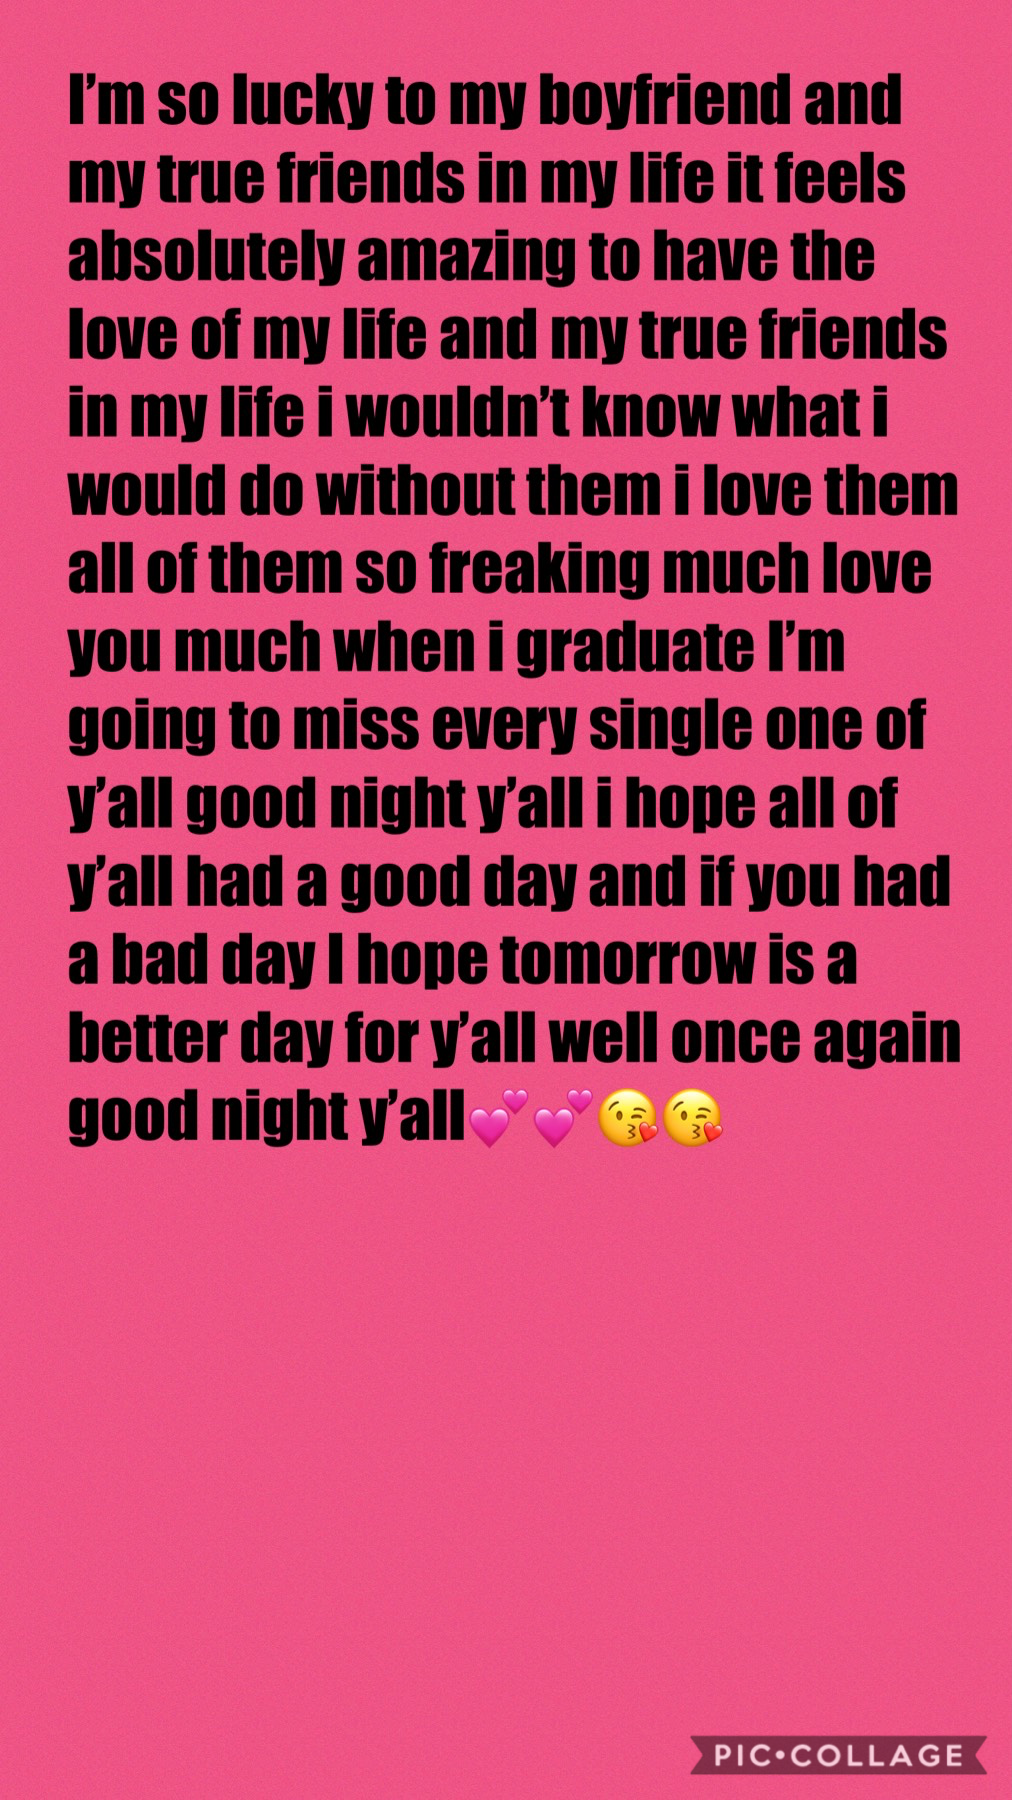 I love y’all so much💕💕😘😘